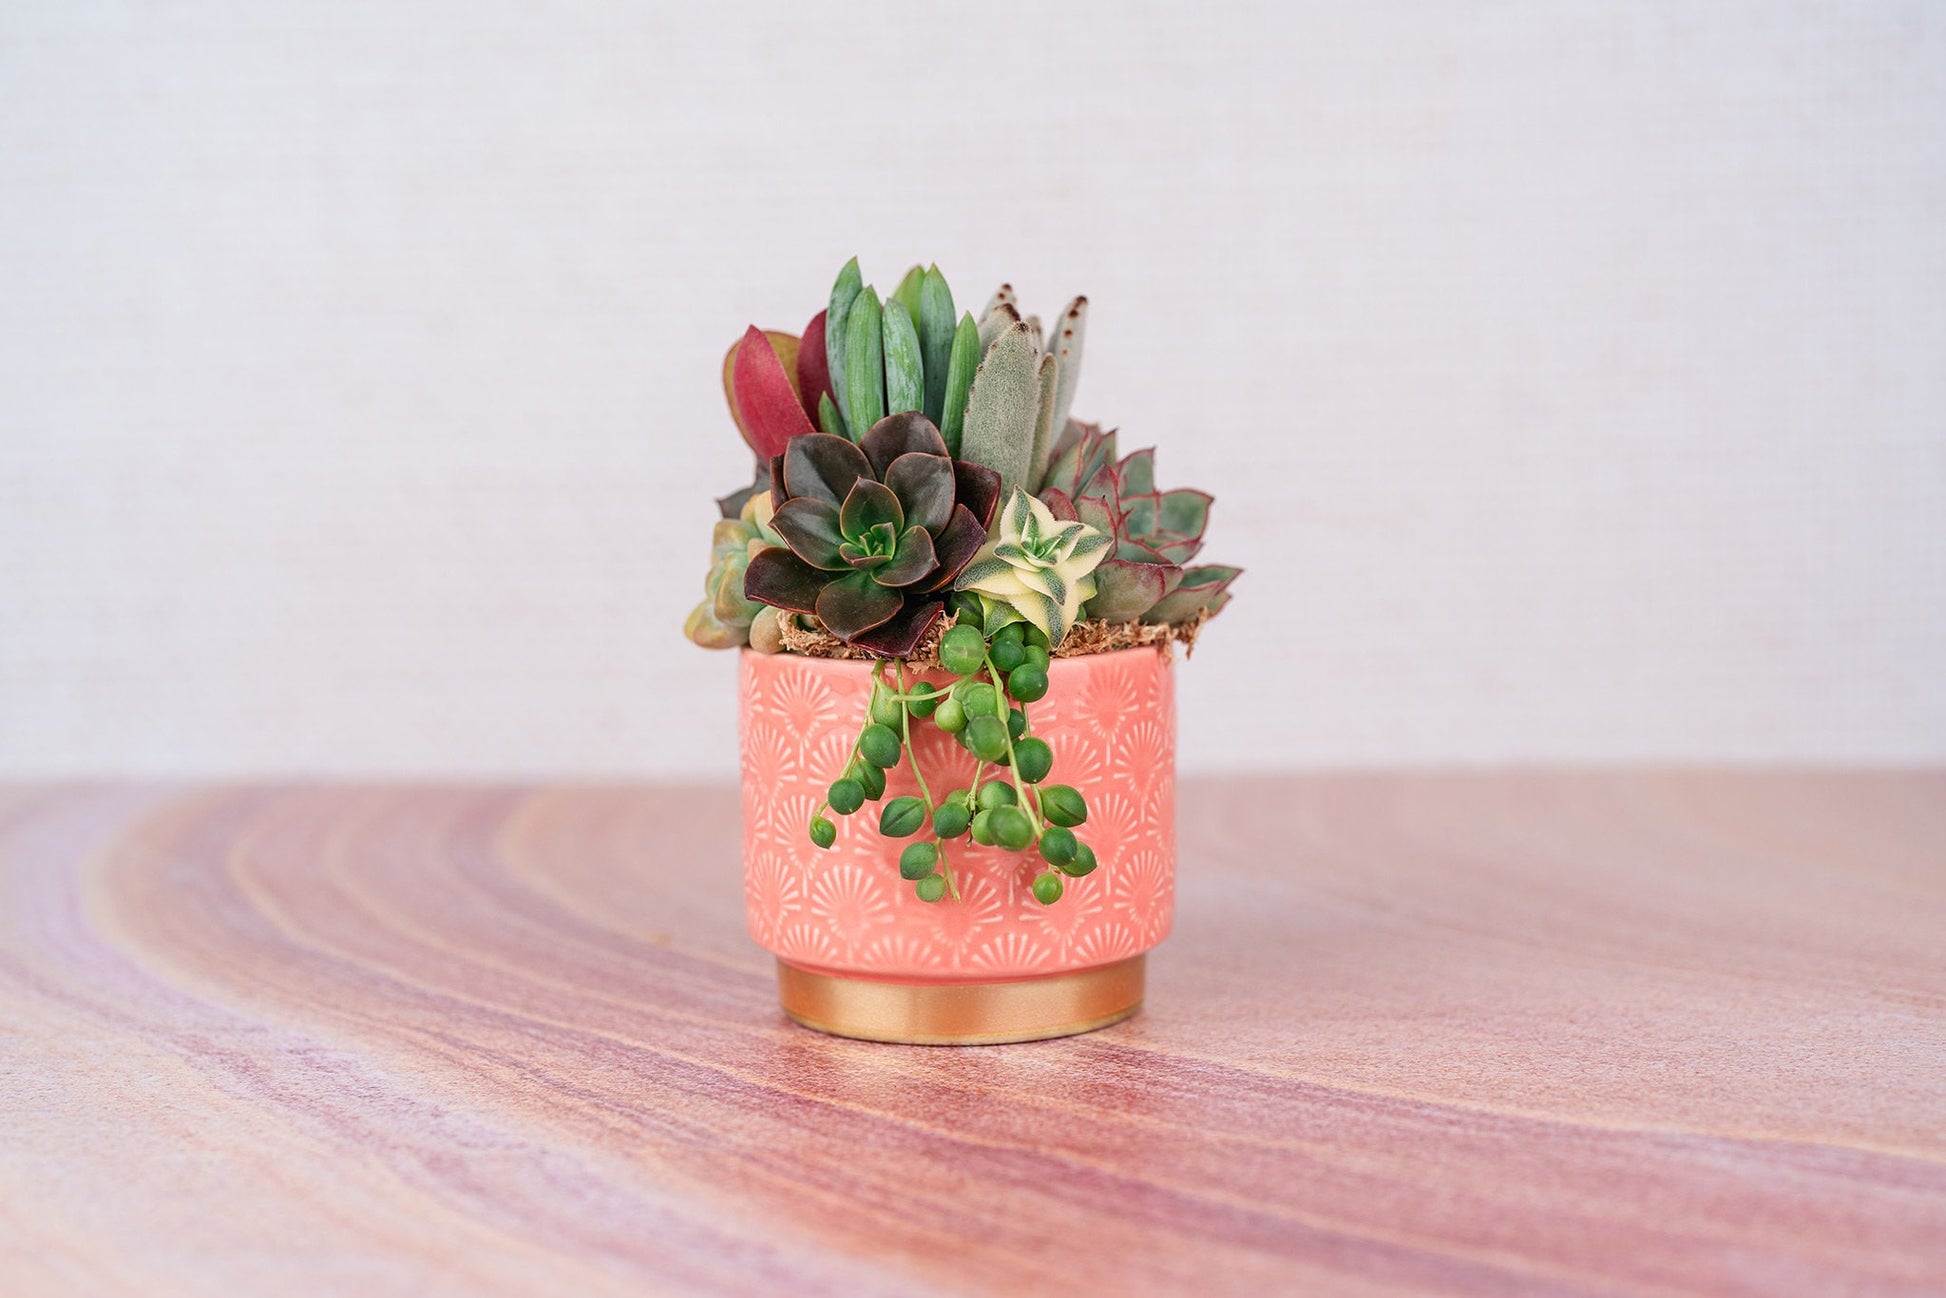 Peach and Gold Patterned Small Living Succulent Arrangement Gift | Birthday, Celebration, Gift for Mom